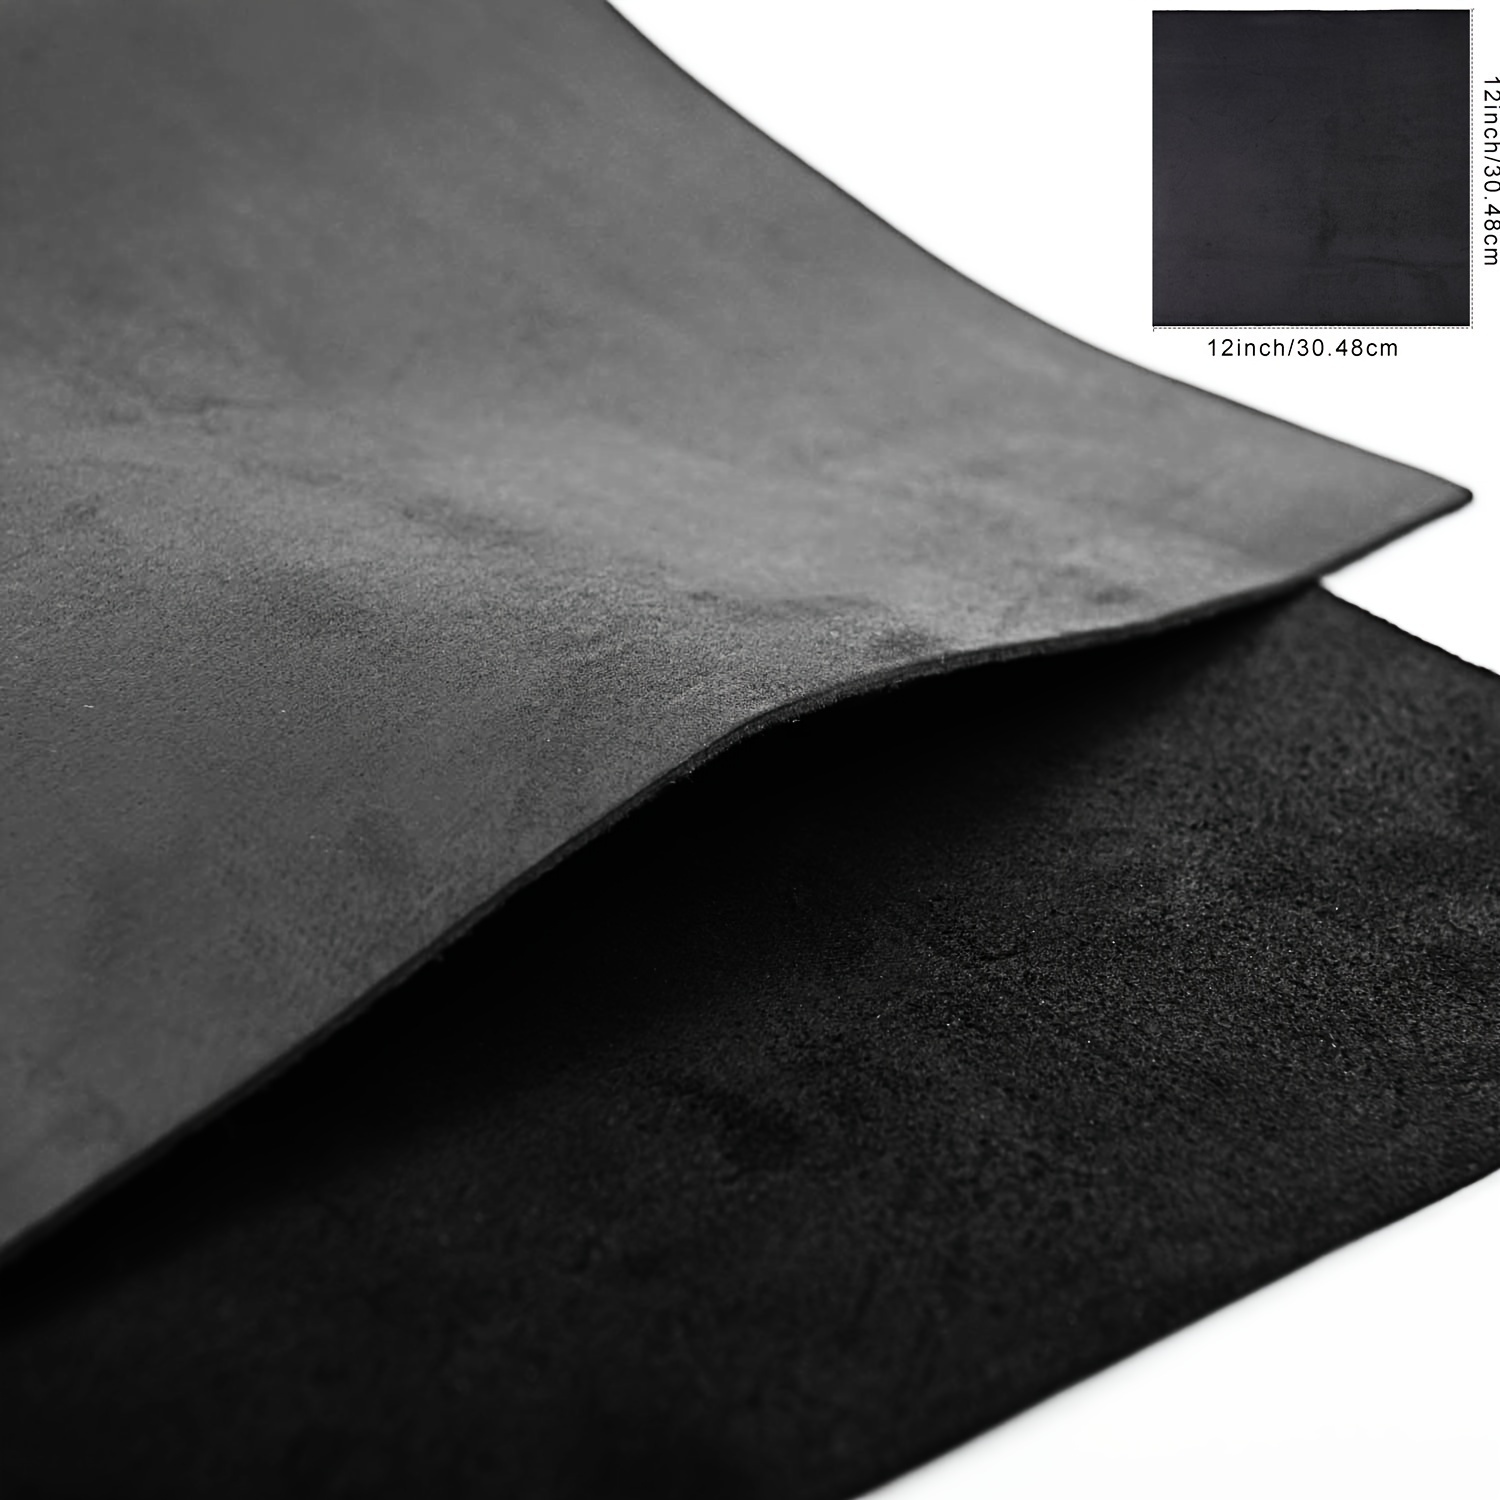 Genuine Leather Sheets for Leather Craft – Full India